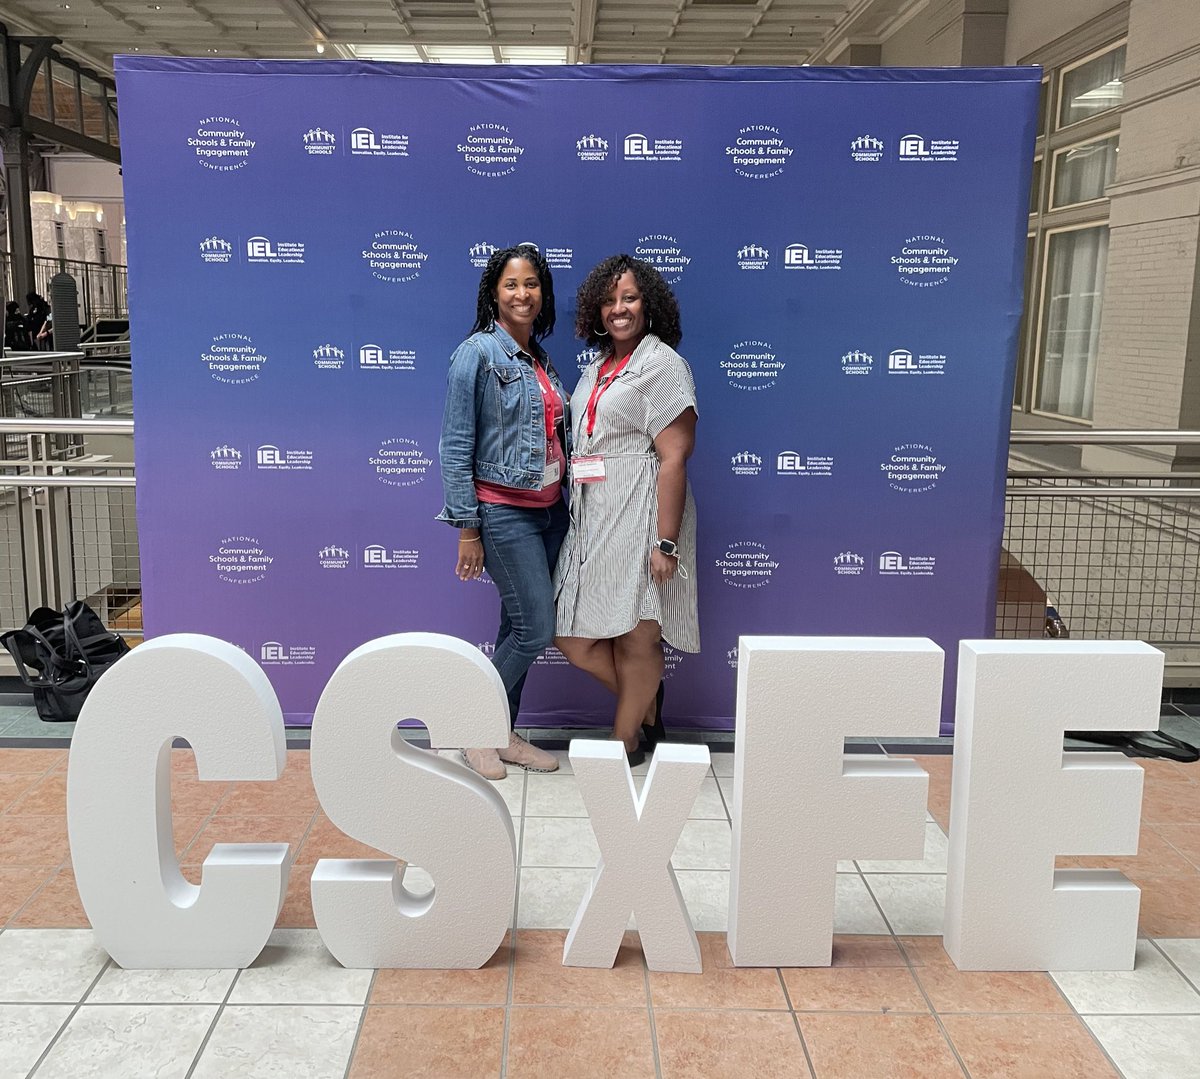 Grateful that I got to attend #CSxFE23 with my principal. Looking forward to implementing what we learned at our school. @HHESHUSKIES @MCPSCommunitySc @IELconnects @CommSchools